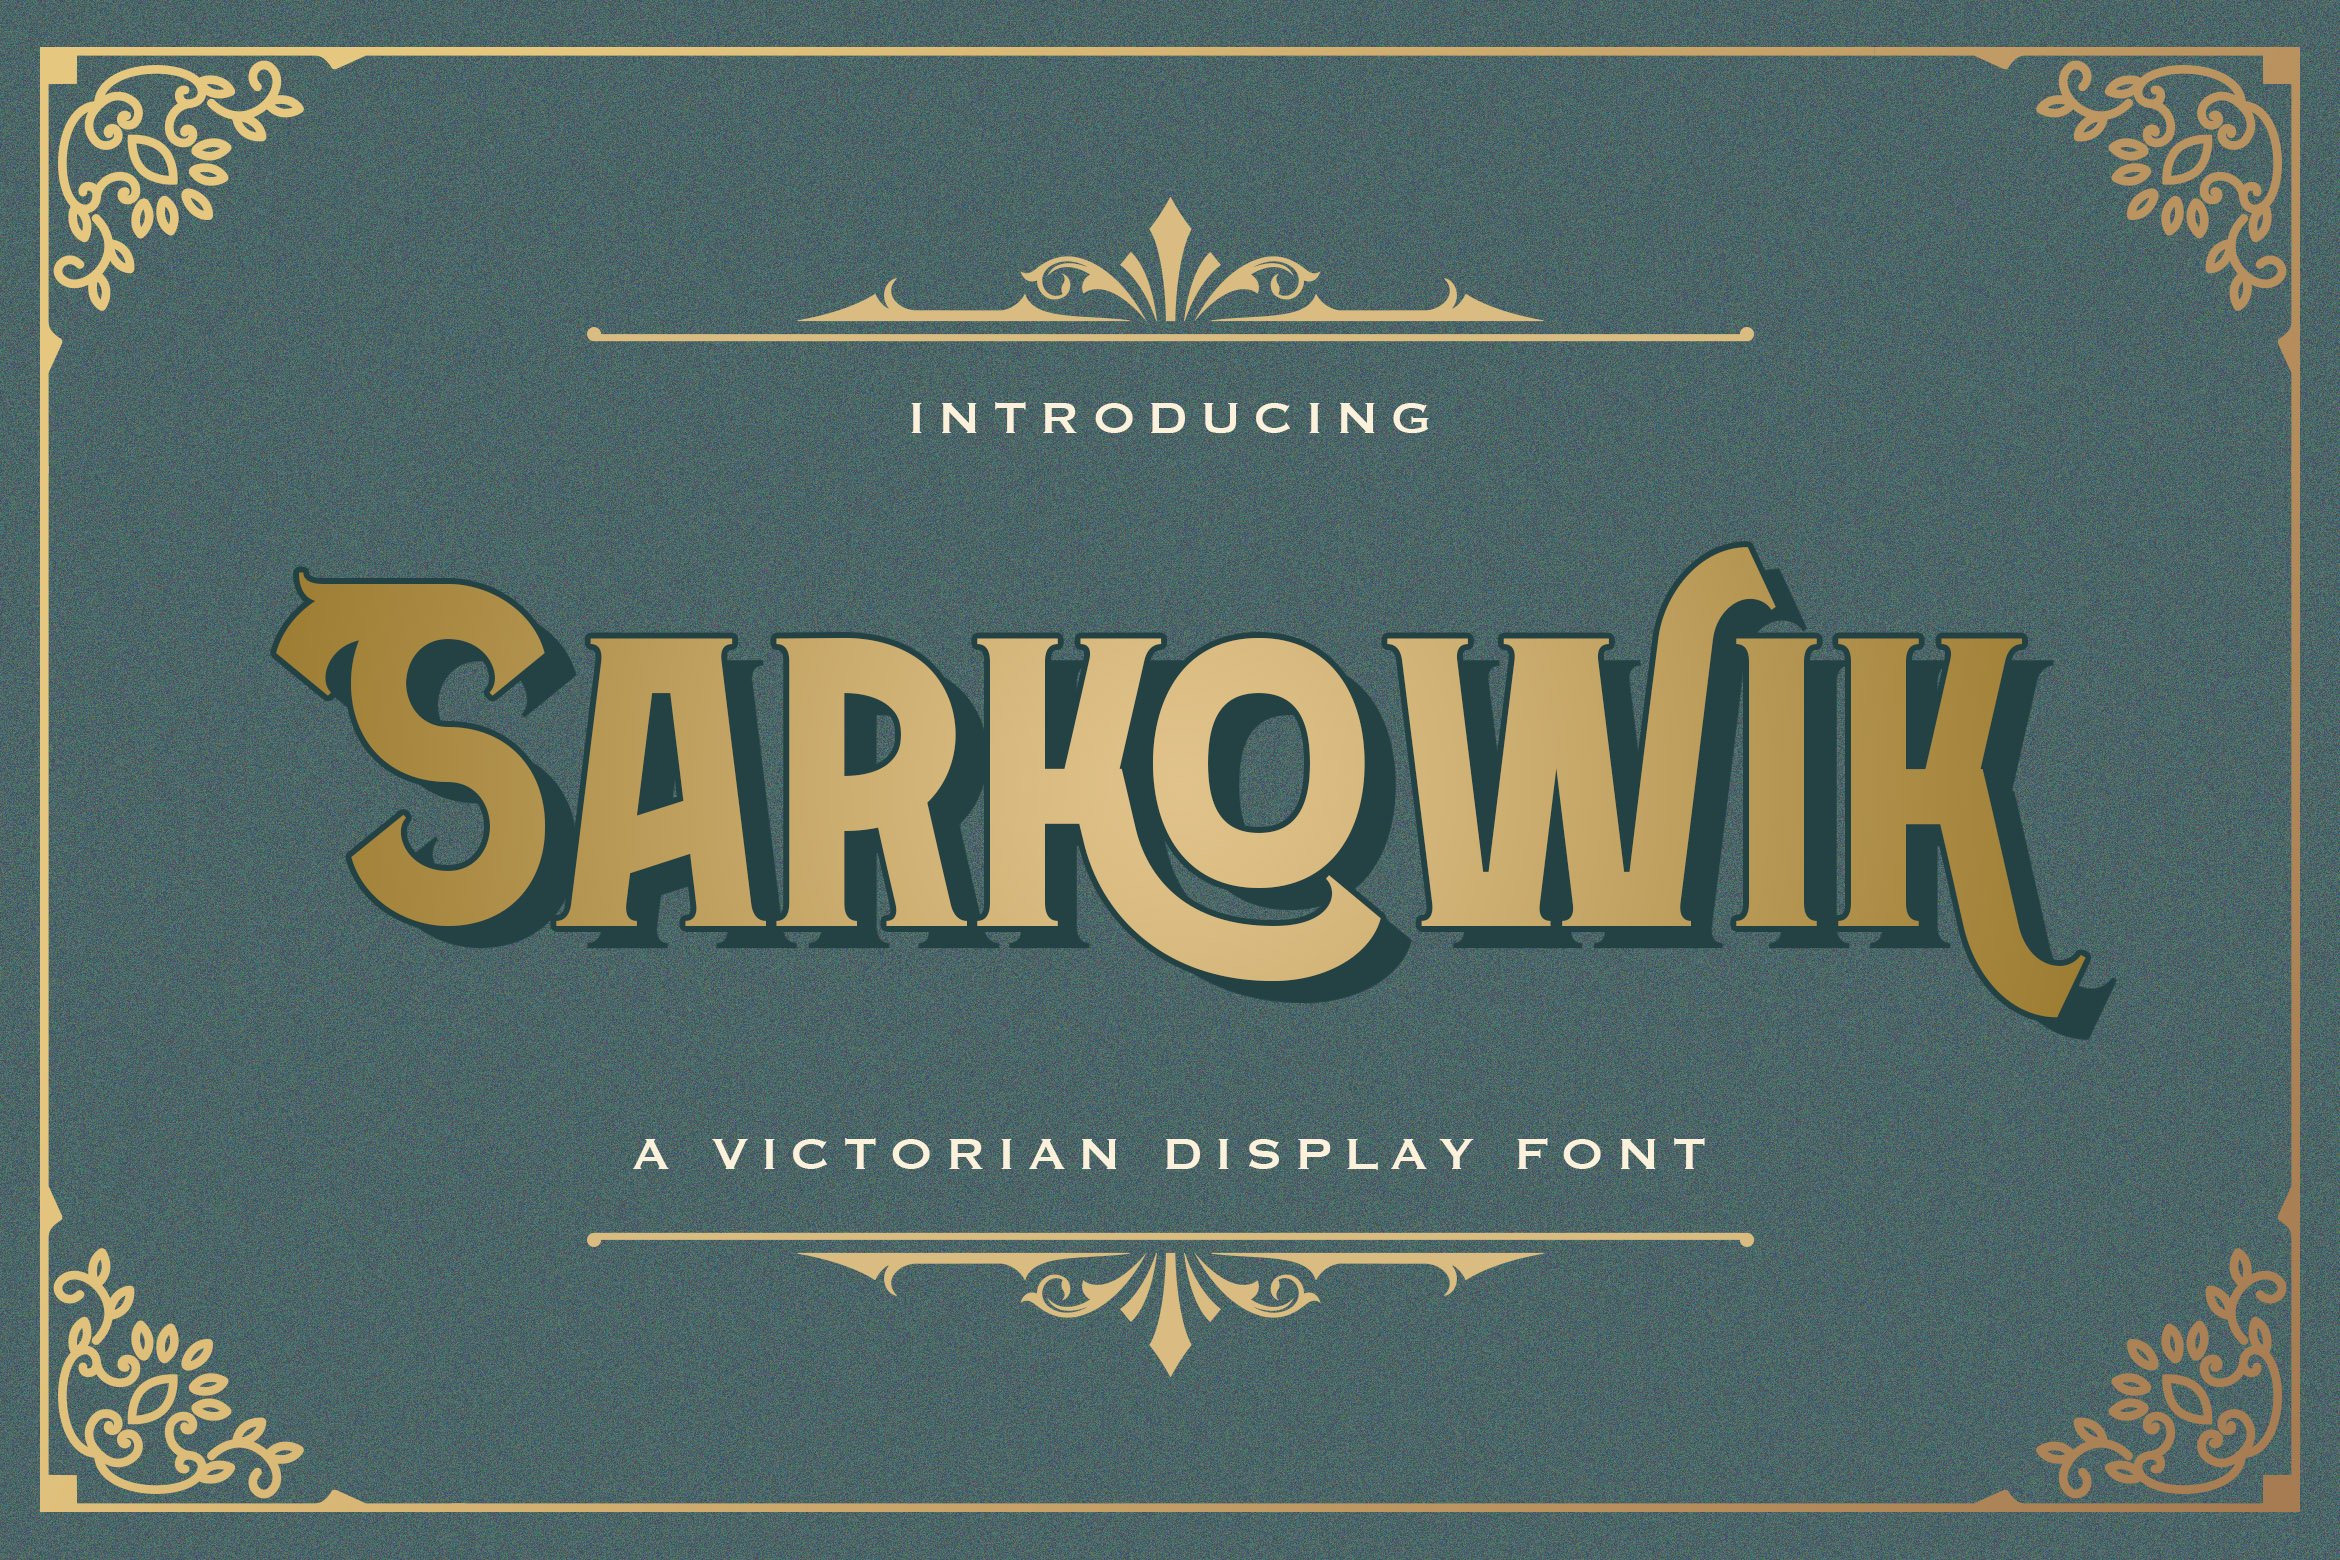 Sarkowik - Victorian Style Font cover image.